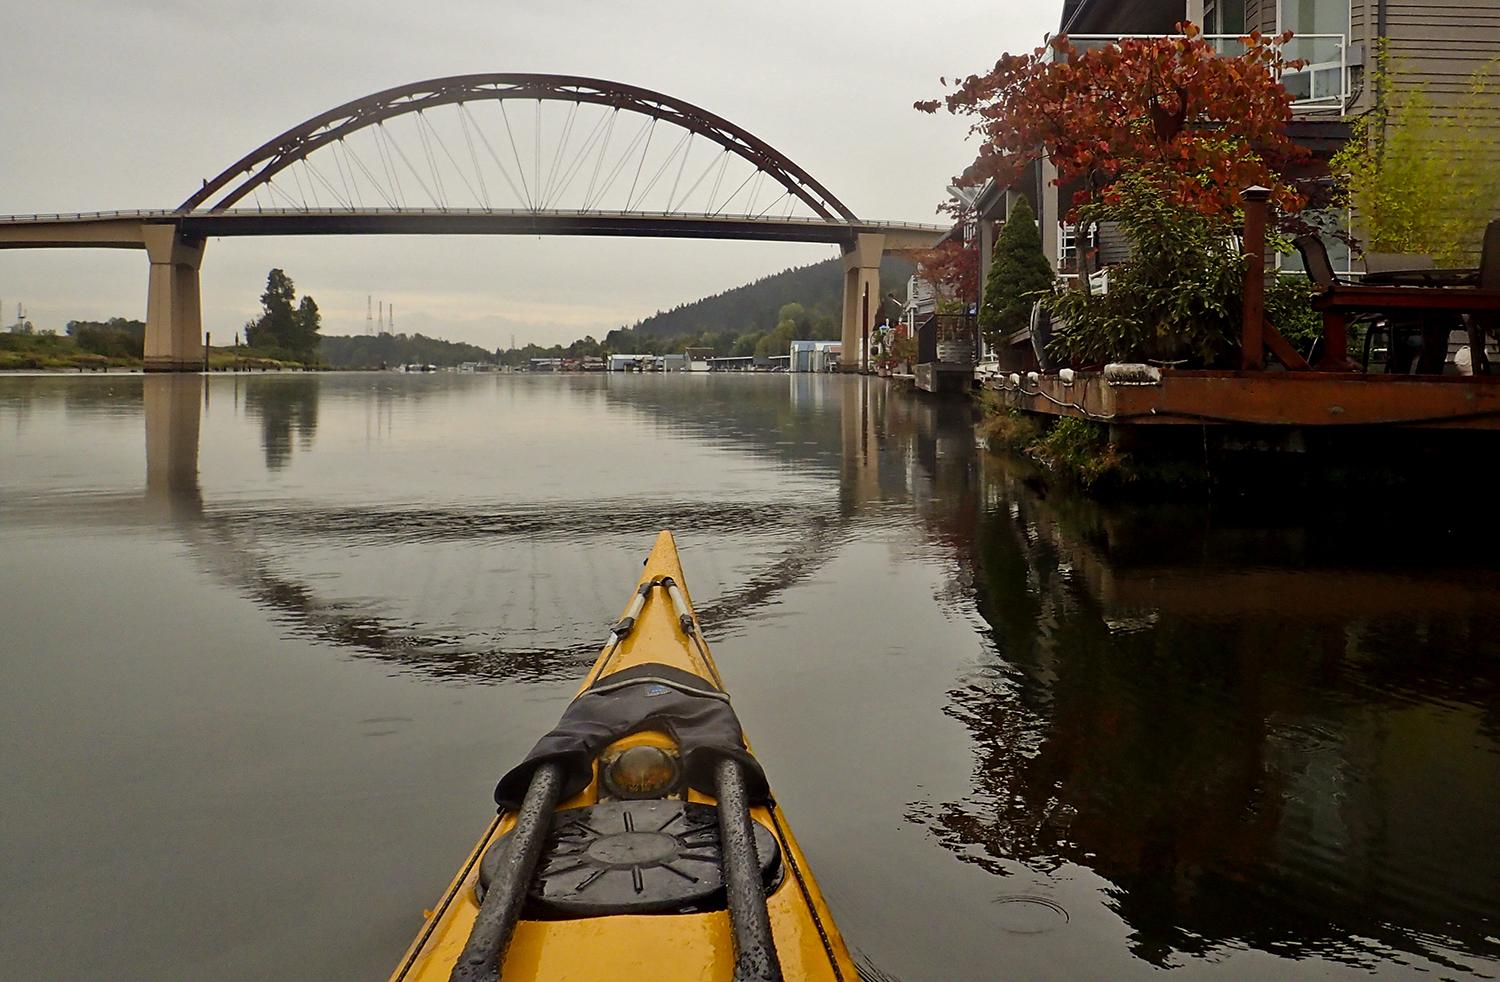 Kayak approaches the Sauvie Island Bridge, floating home on the right